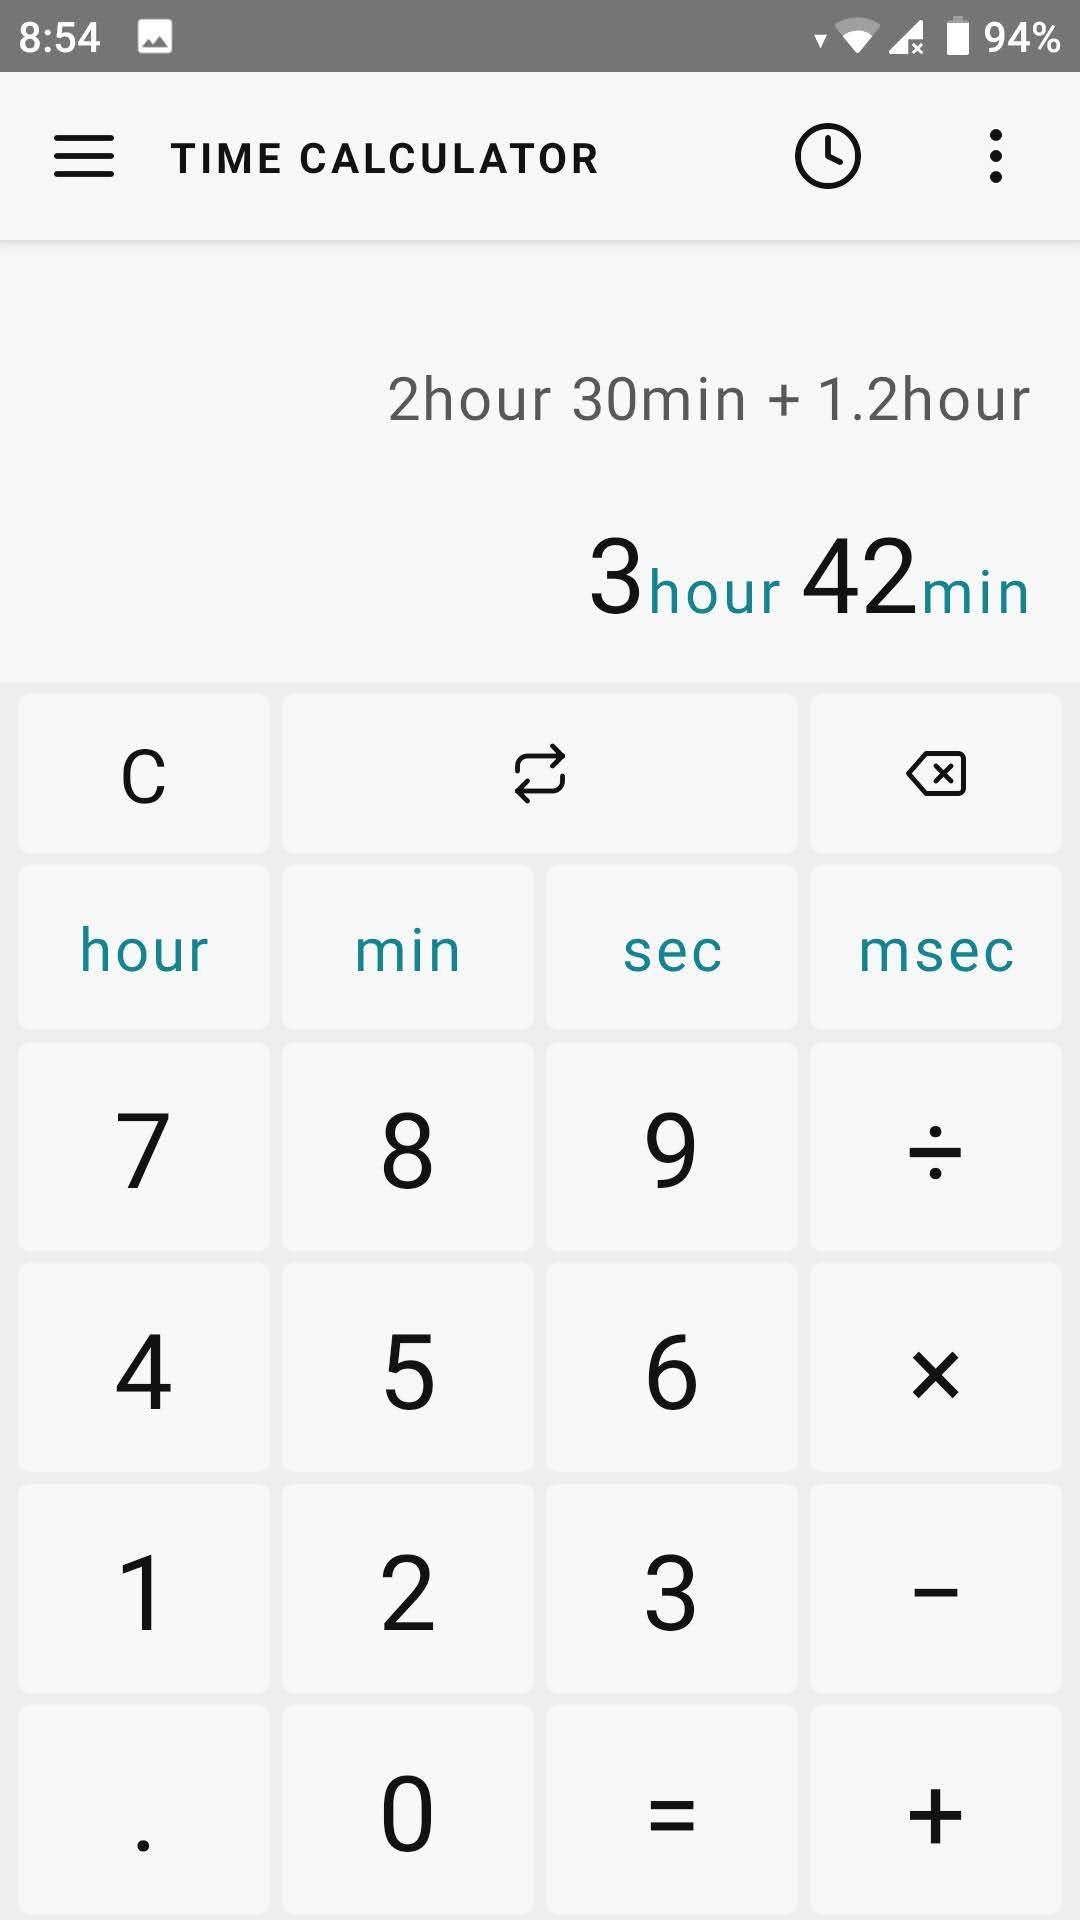 Time Calculator for Android - APK Download